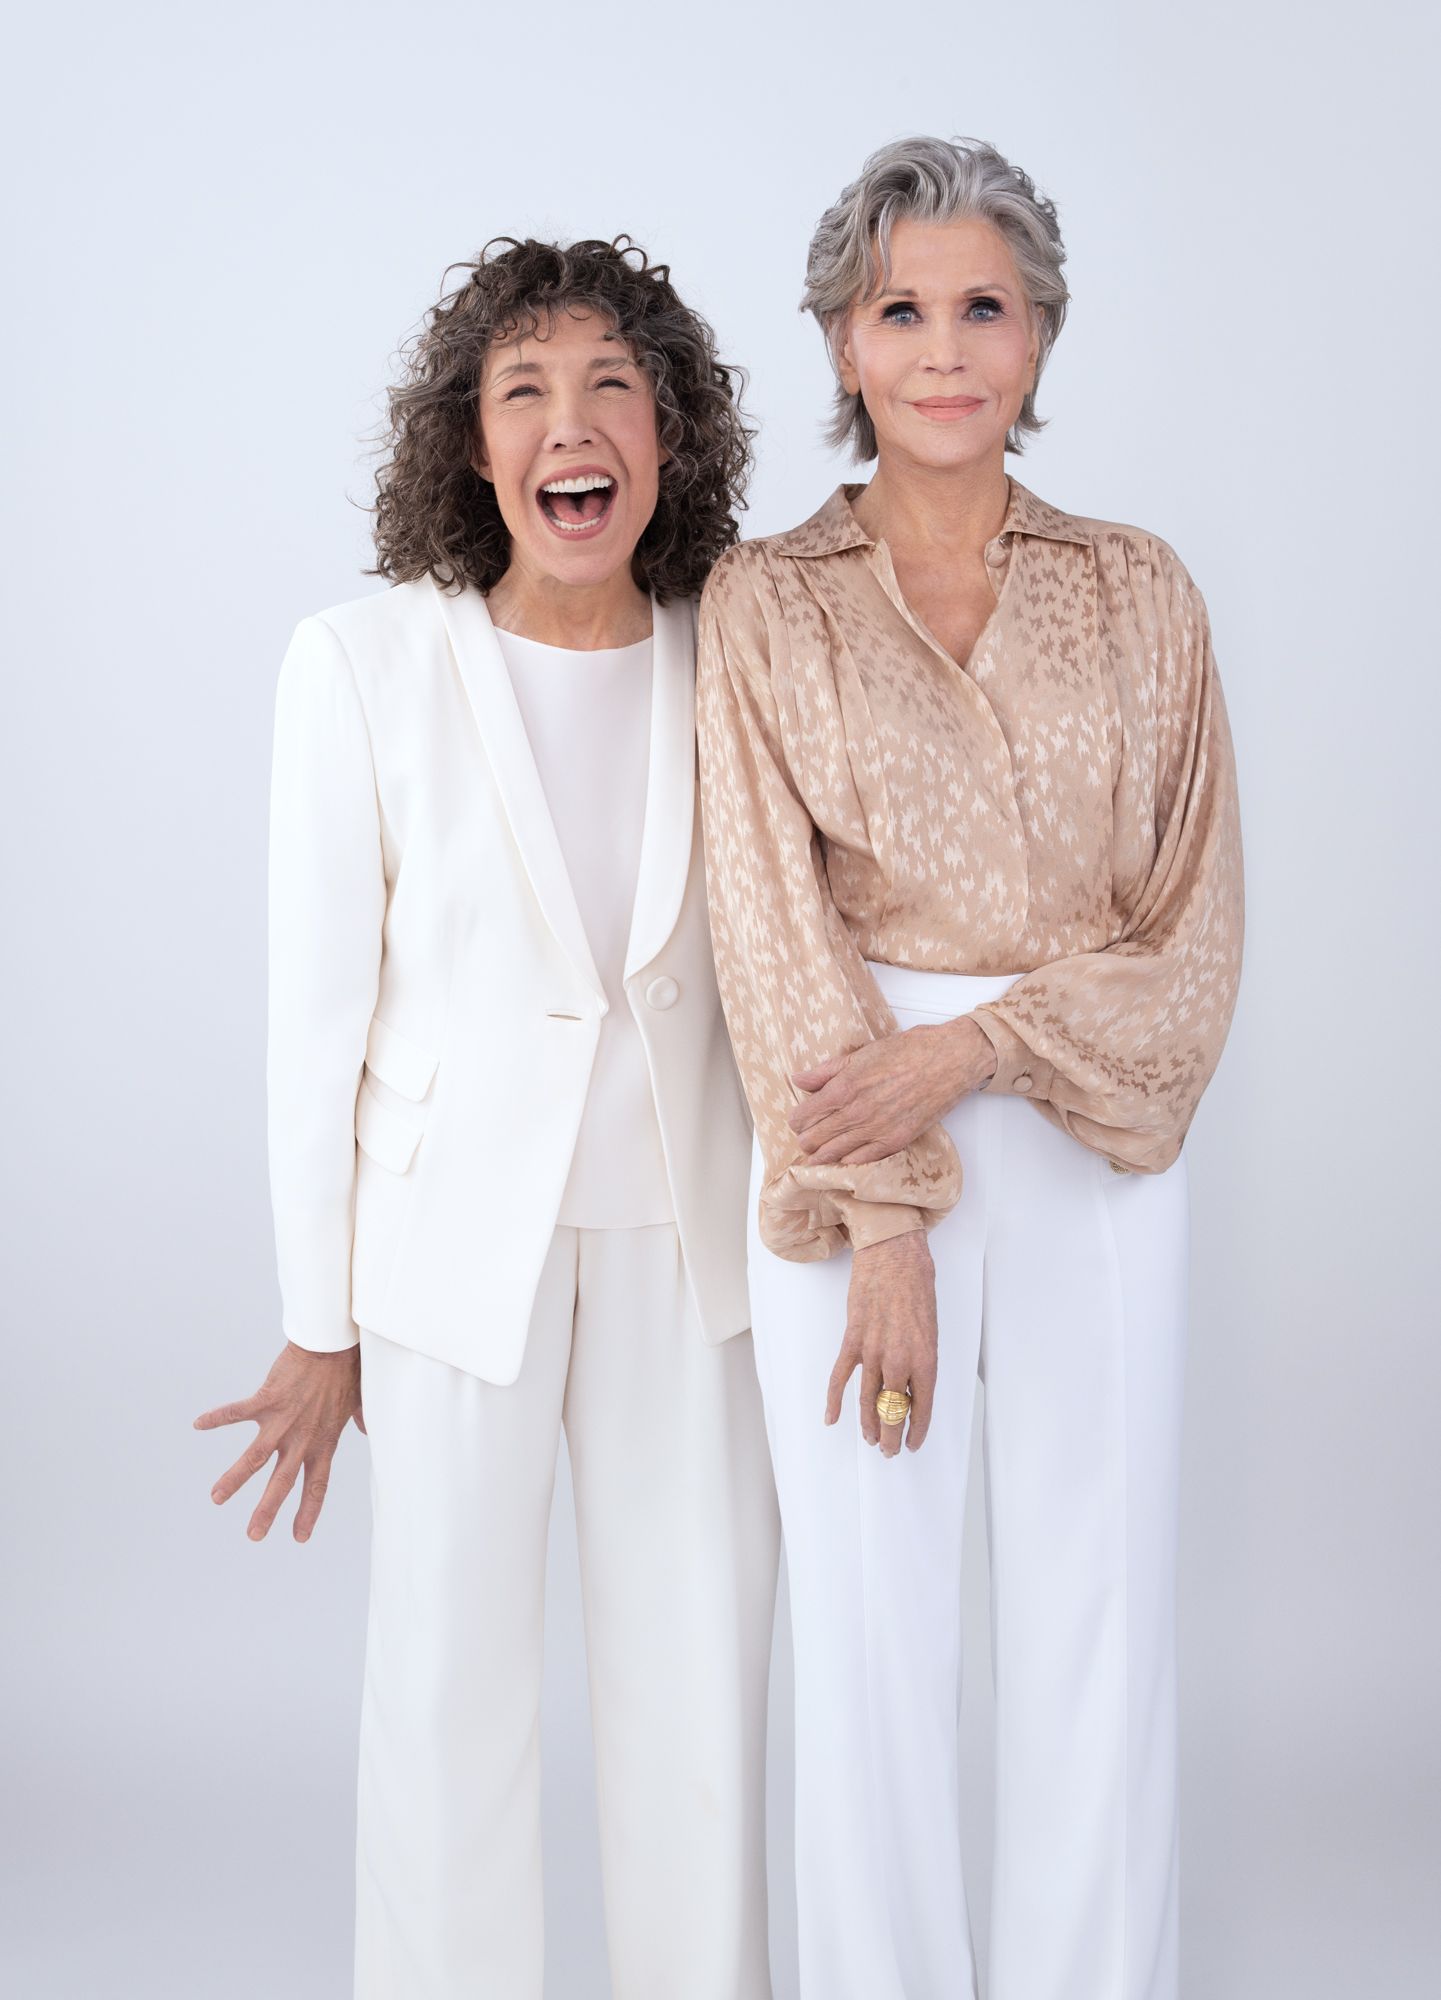 Jane Fonda and Lily Tomlin Are Just Getting Started pic